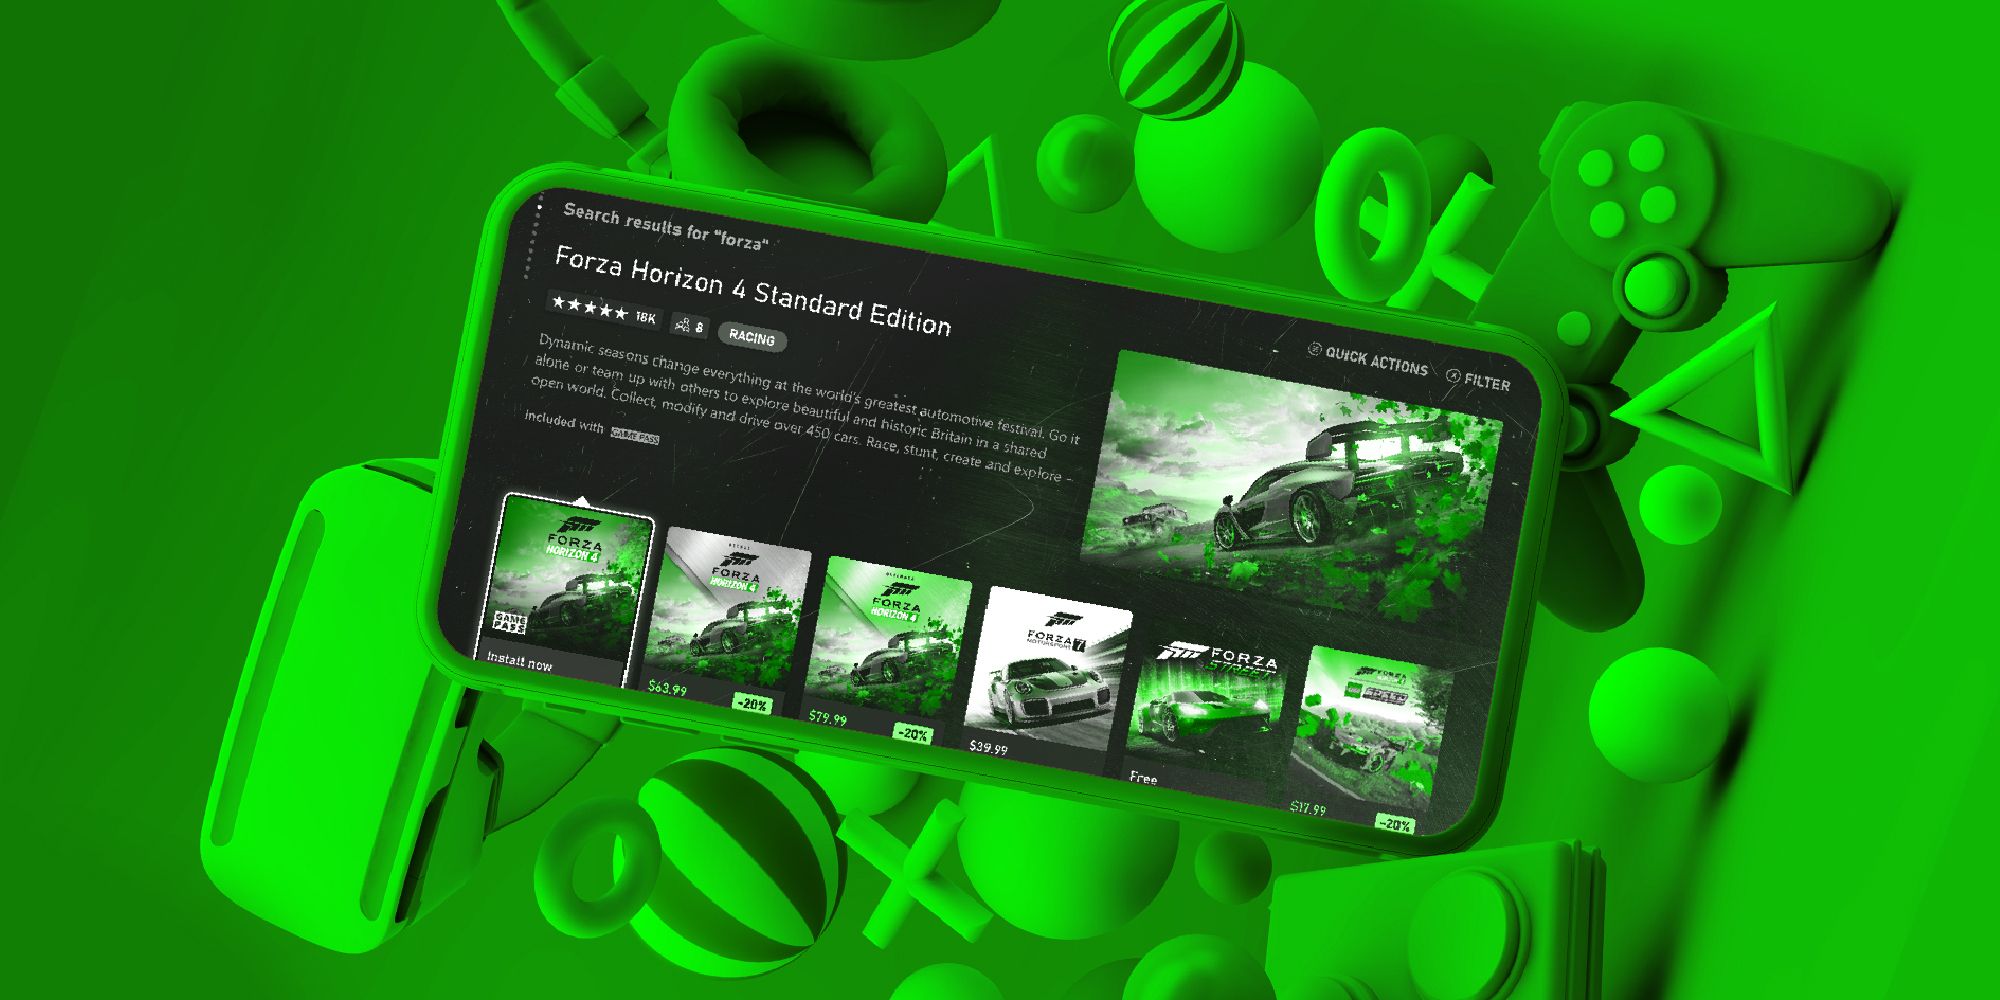 Phil Spencer details Microsoft's plan to open an Xbox Mobile App